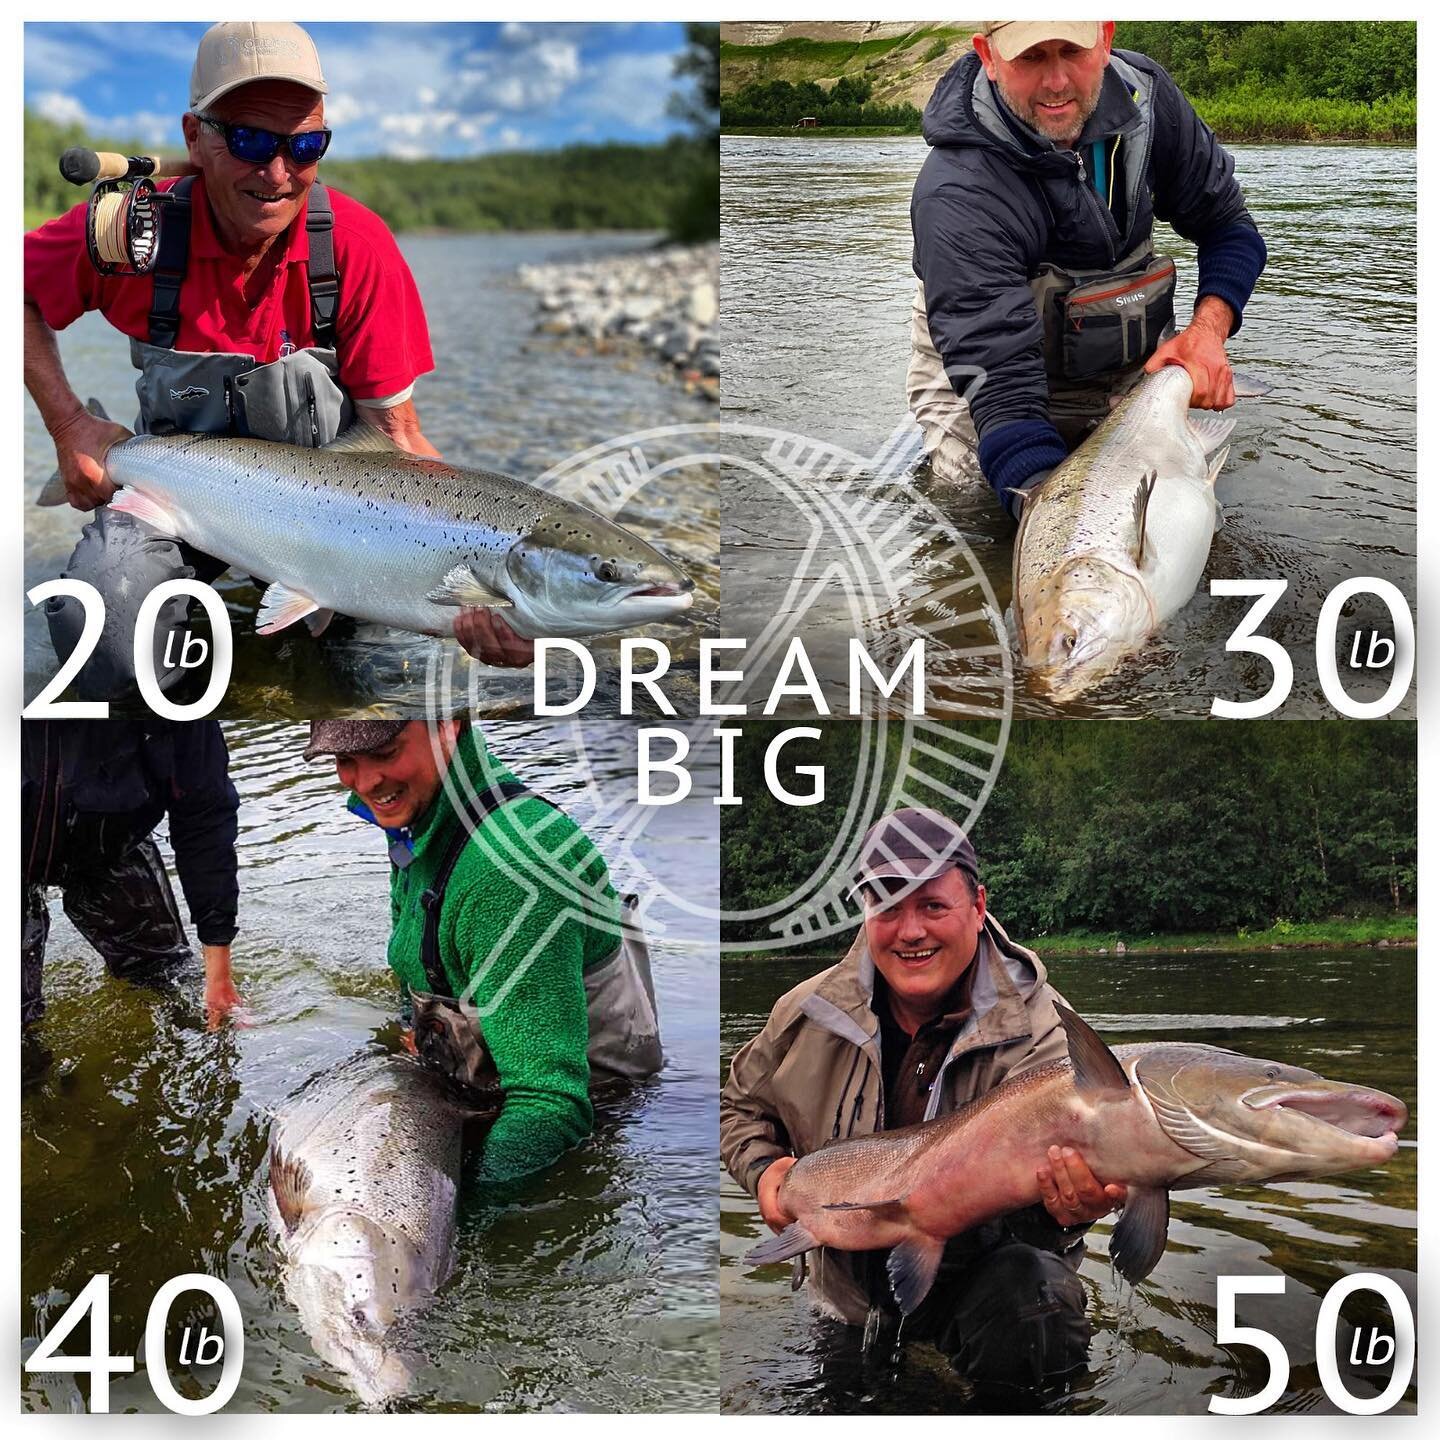 We are super excited as the salmon season is getting closer here in the most northern hemisphere of Scandinavia, we cannot wait to see what adventures this season will bring us on Older&oslash; Fly fishing lodge.
We are looking very much forward to w